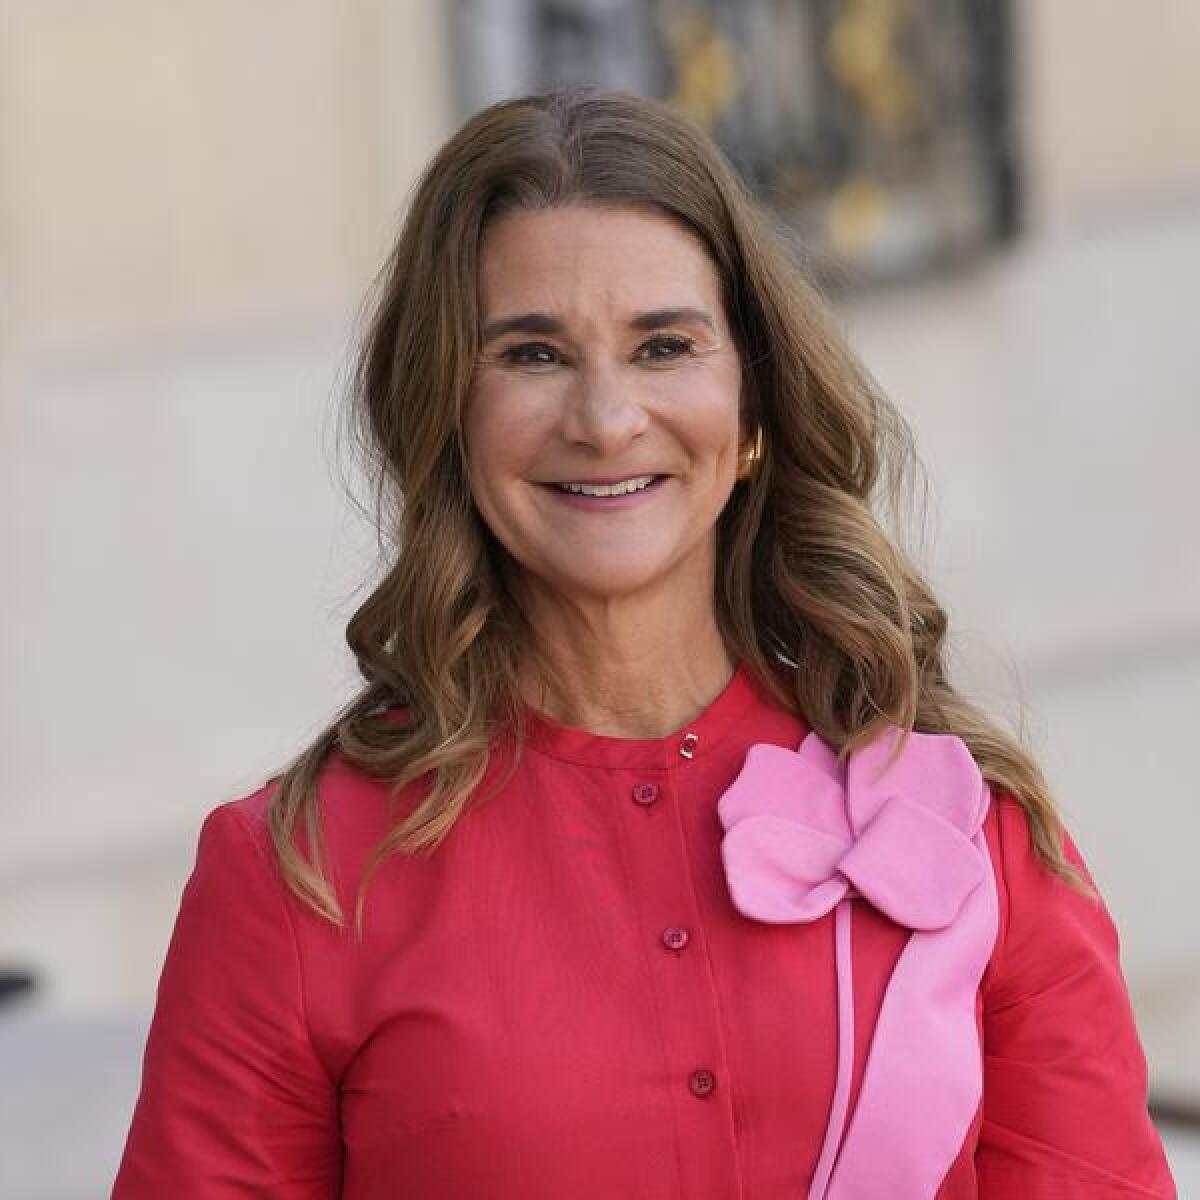 Melinda exits Gates Foundation with $A19b for charity